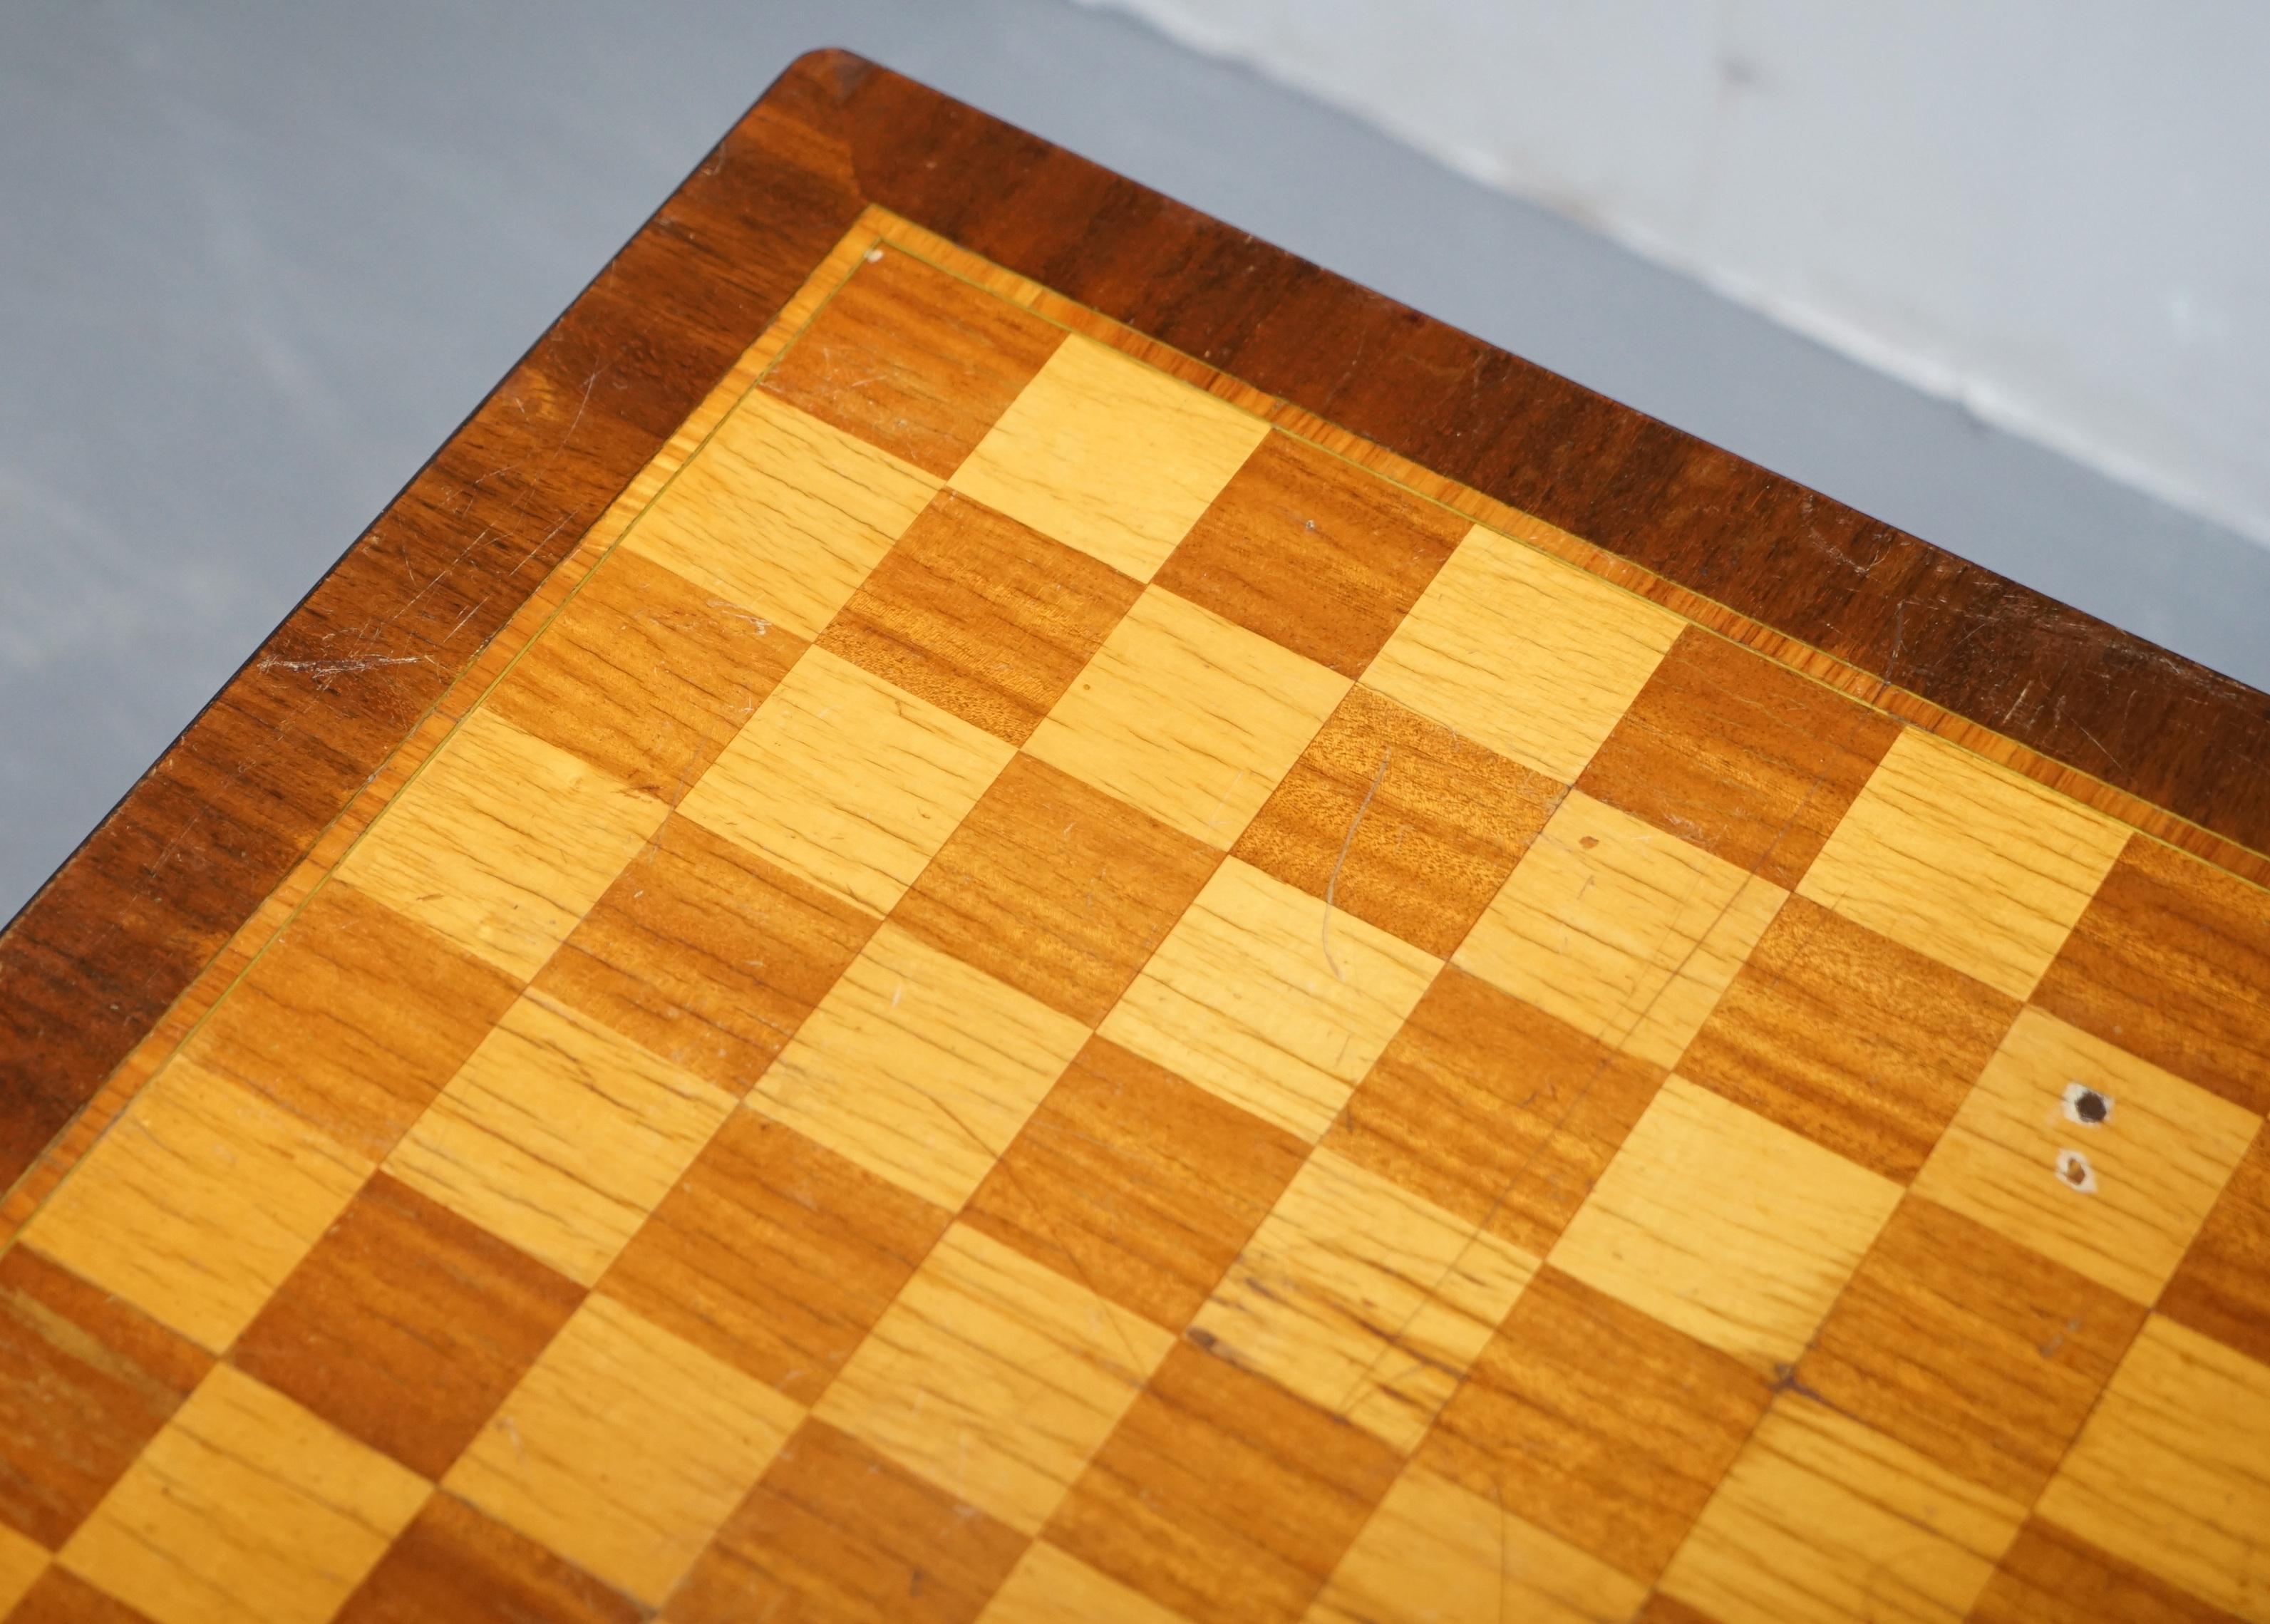 Hand-Crafted Vintage Walnut & Hardwood Marquetry Inlaid Chess Board Games Table with Drawer For Sale